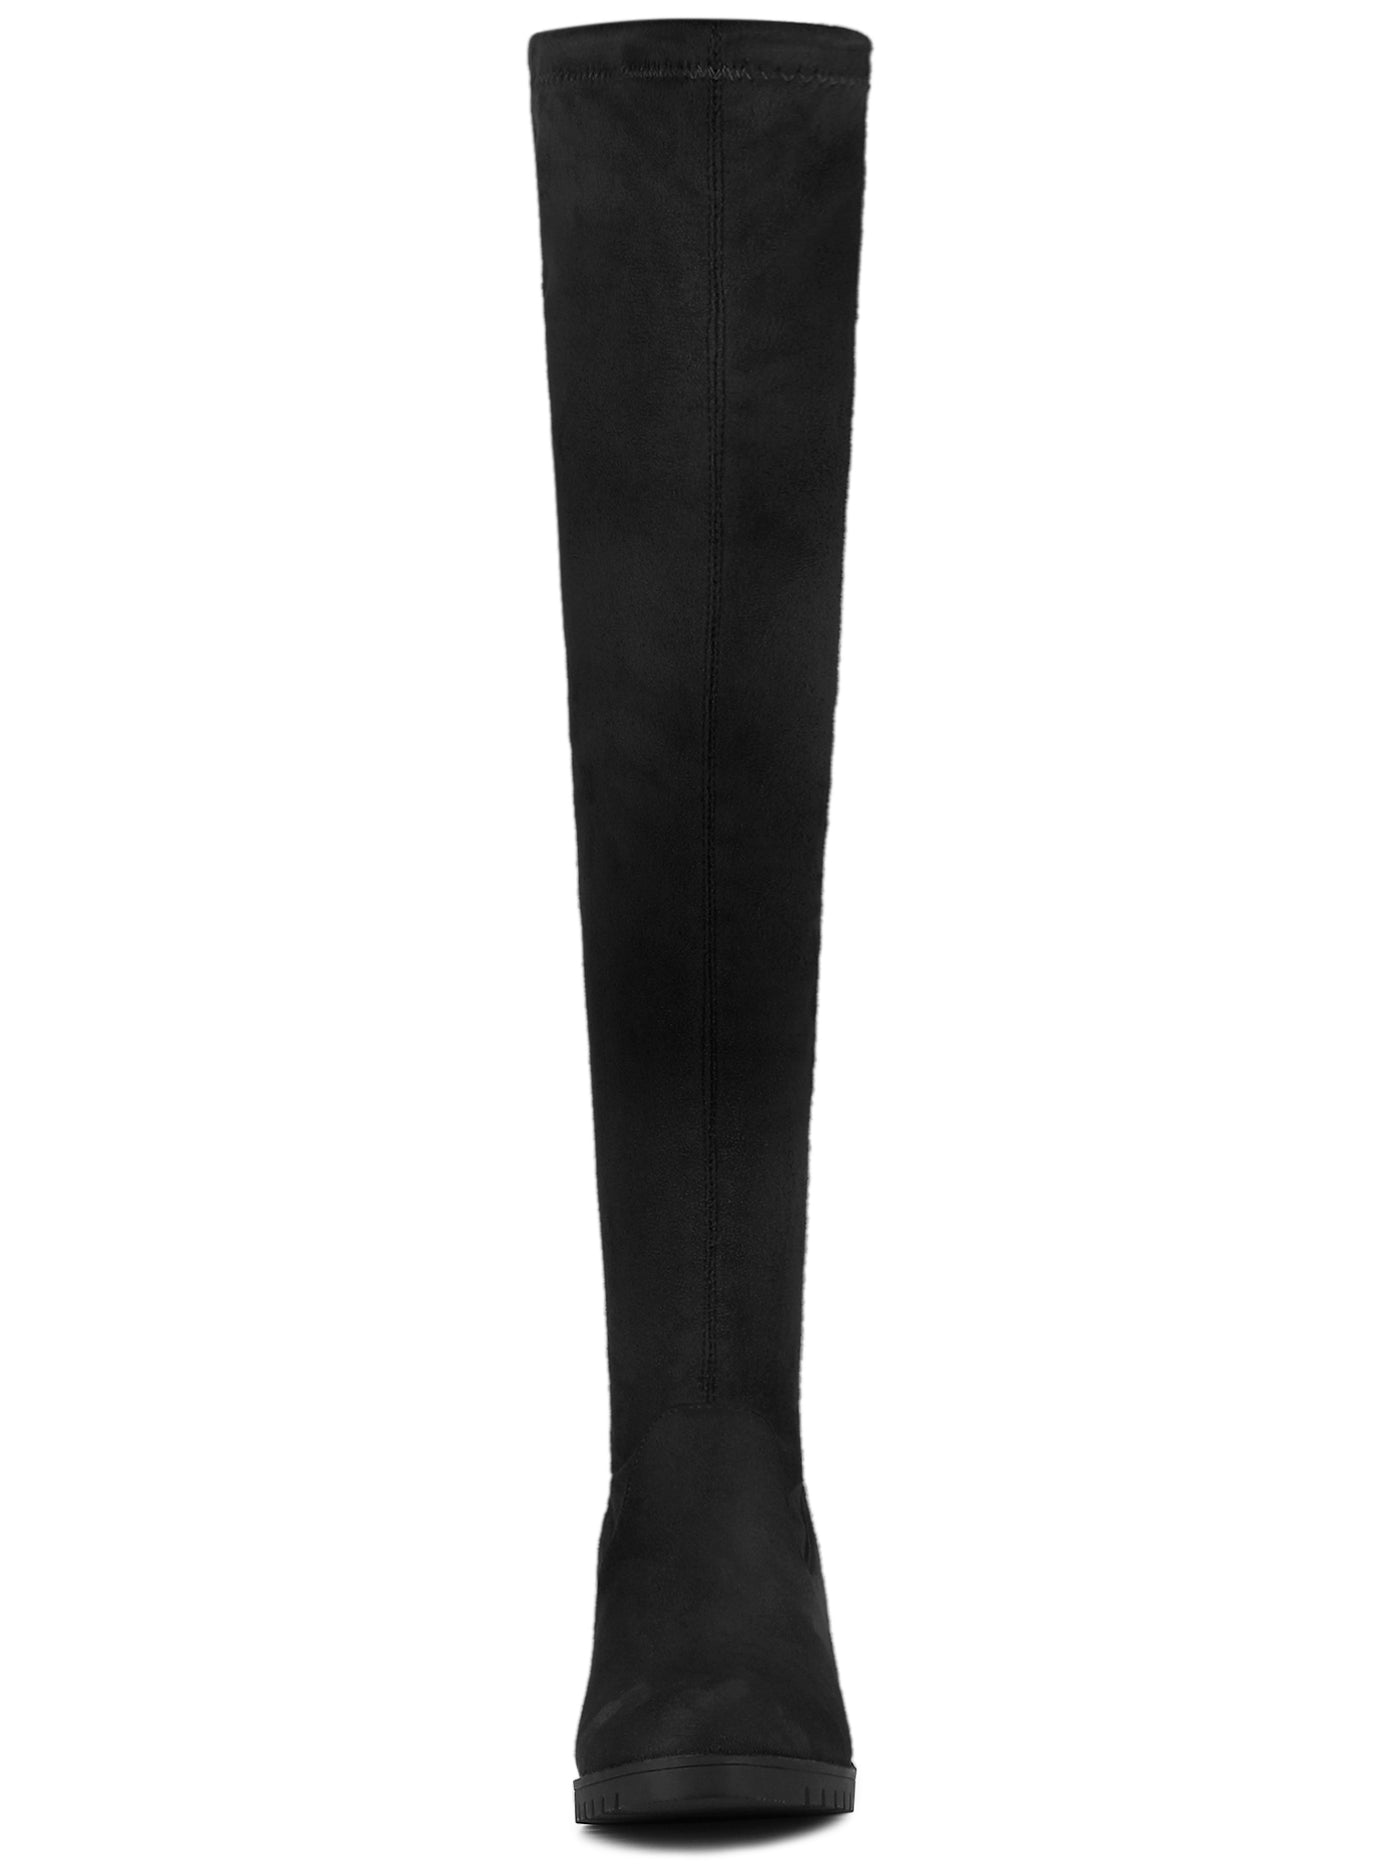 Allegra K Round Toe Chunky Heel Thigh High Over the Knee Boots